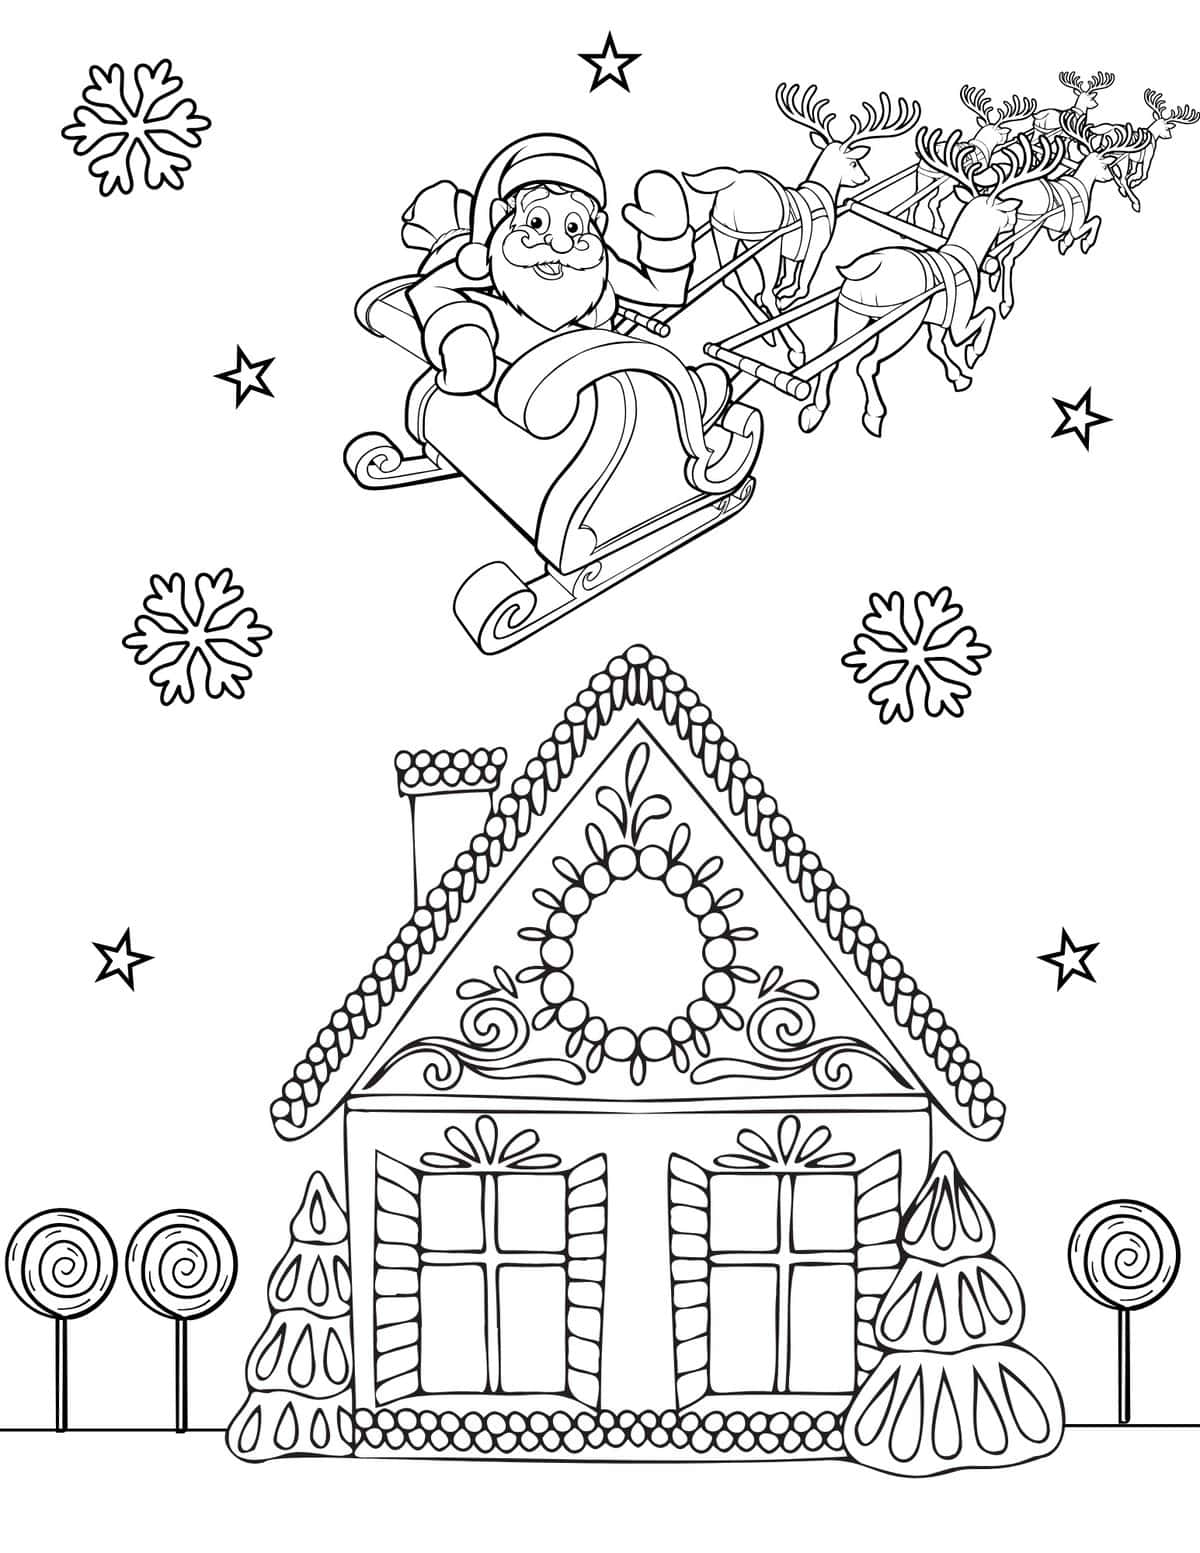 gingerbread house coloring page santa flying over